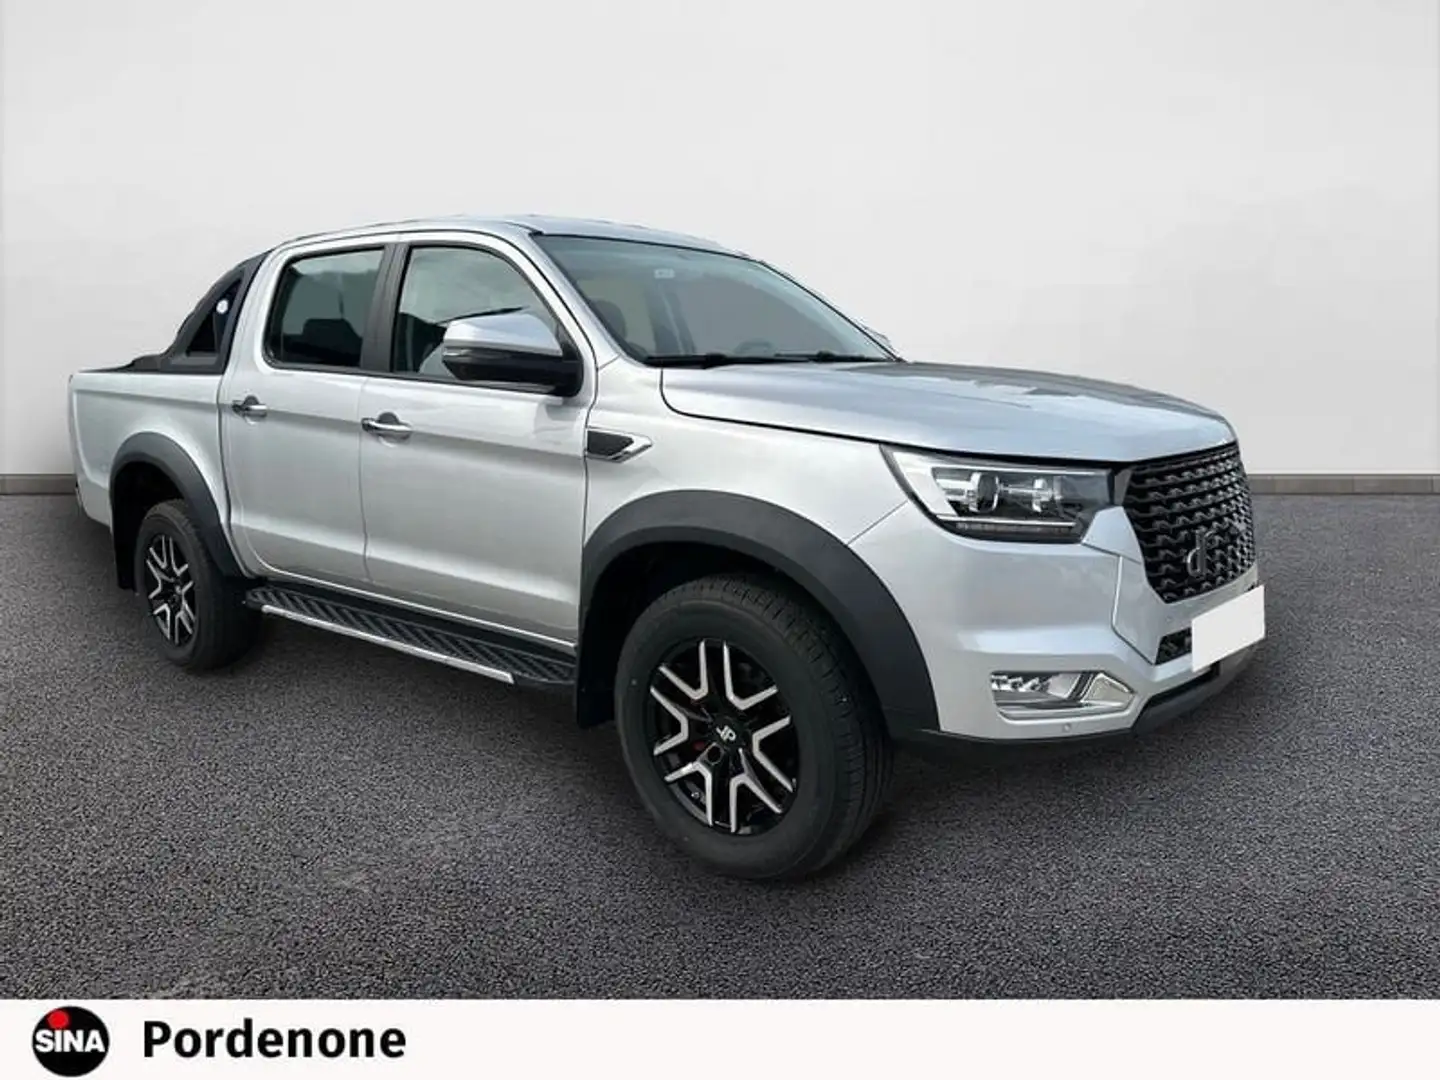 DR Automobiles PK8 2.0 Turbo Diesel Doppia Cabina 4x4 - COOL WUV - F Argent - 2